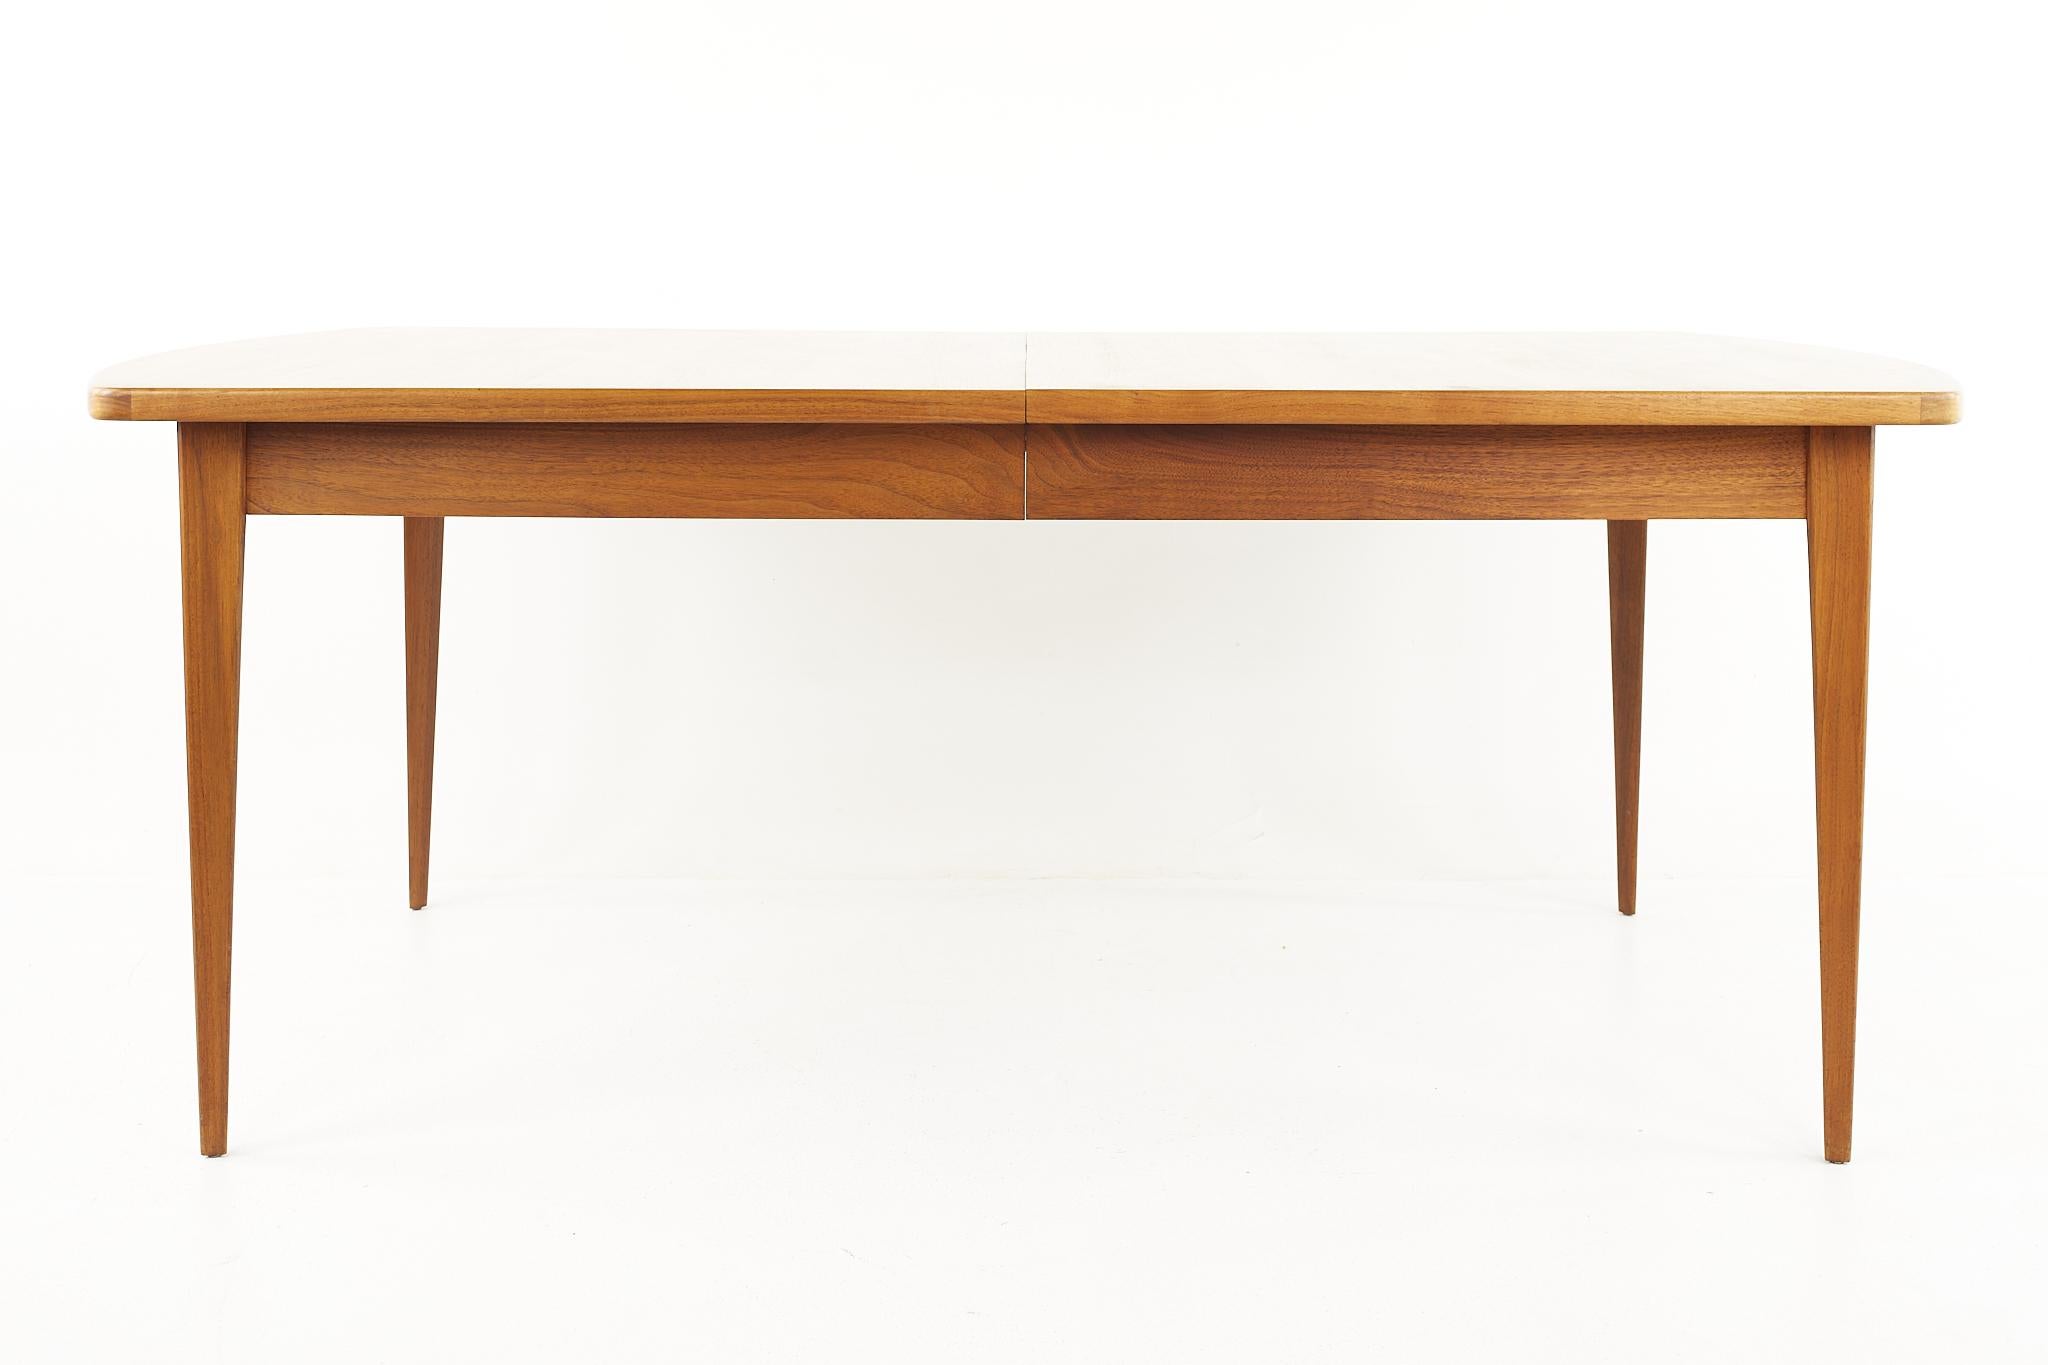 Bertha Schaefer for Singer and Sons Mid Century Walnut Expanding dining table

The table measures: 75.75 wide x 42.75 deep x 30 high, with a chair clearance of 25 inches; each leaf is 16 inches wide, making a maximum table width 123.75 inches when